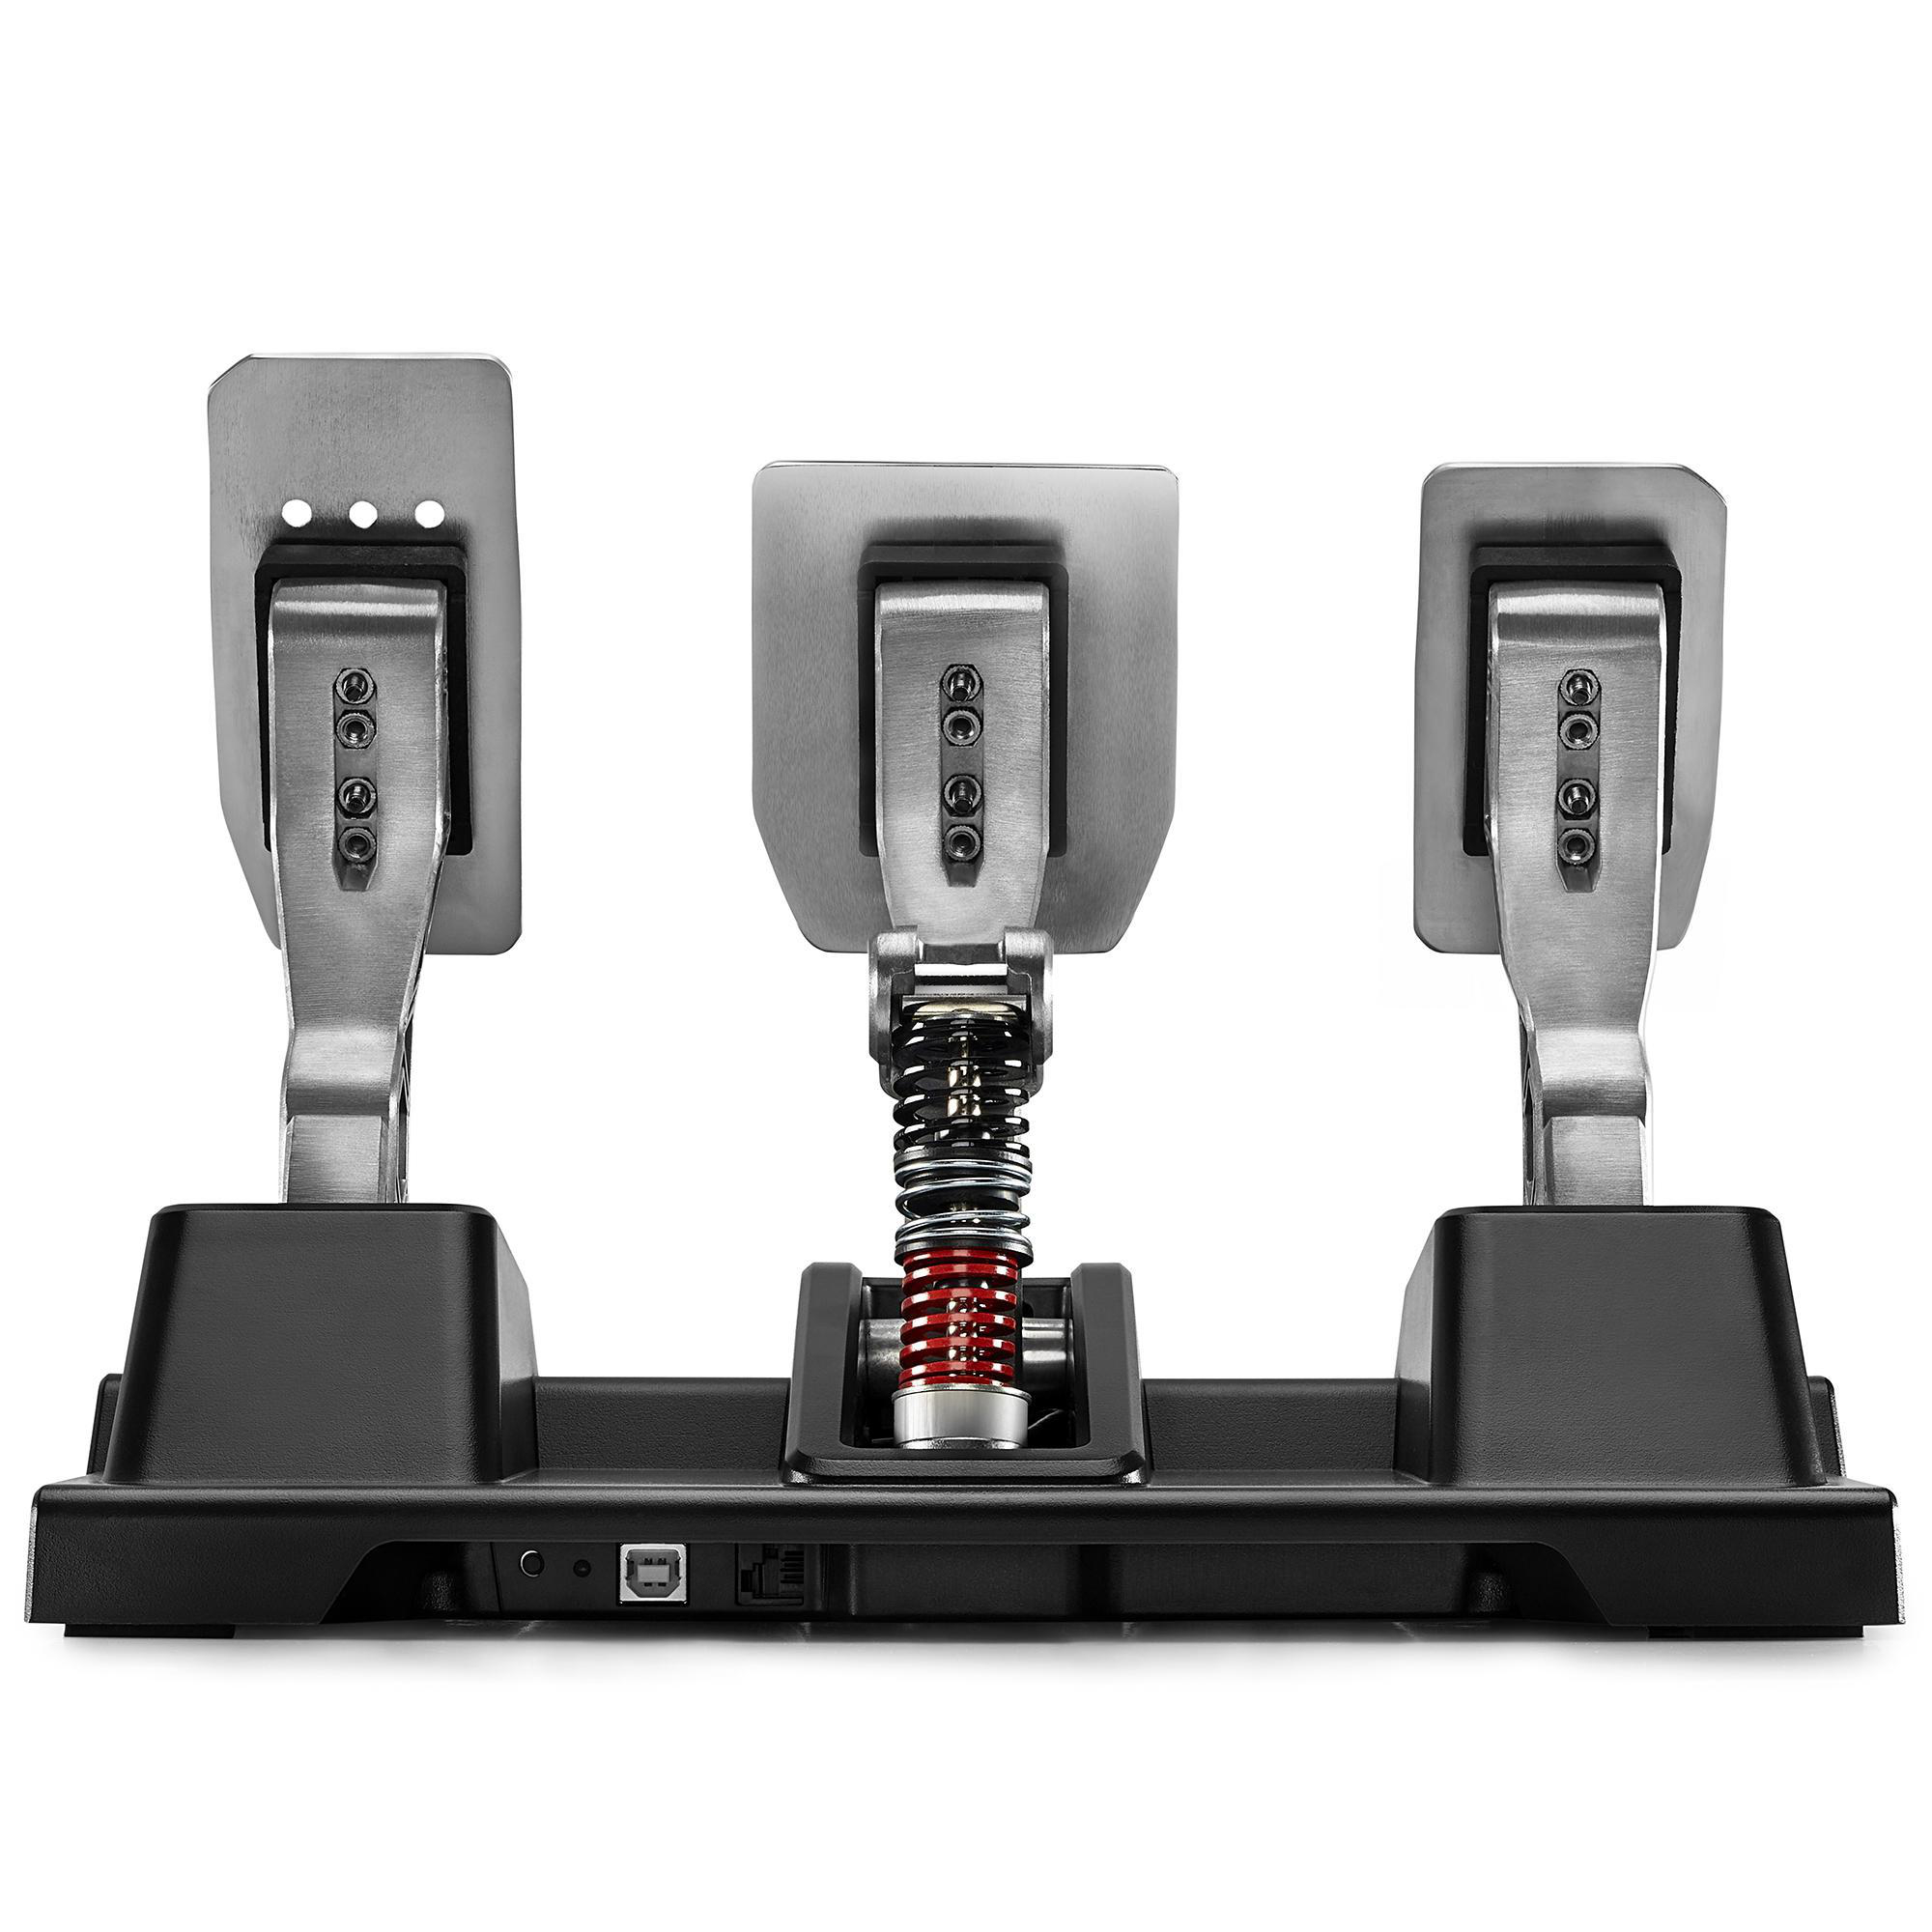 THRUSTMASTER T-LCM Pedals PRO